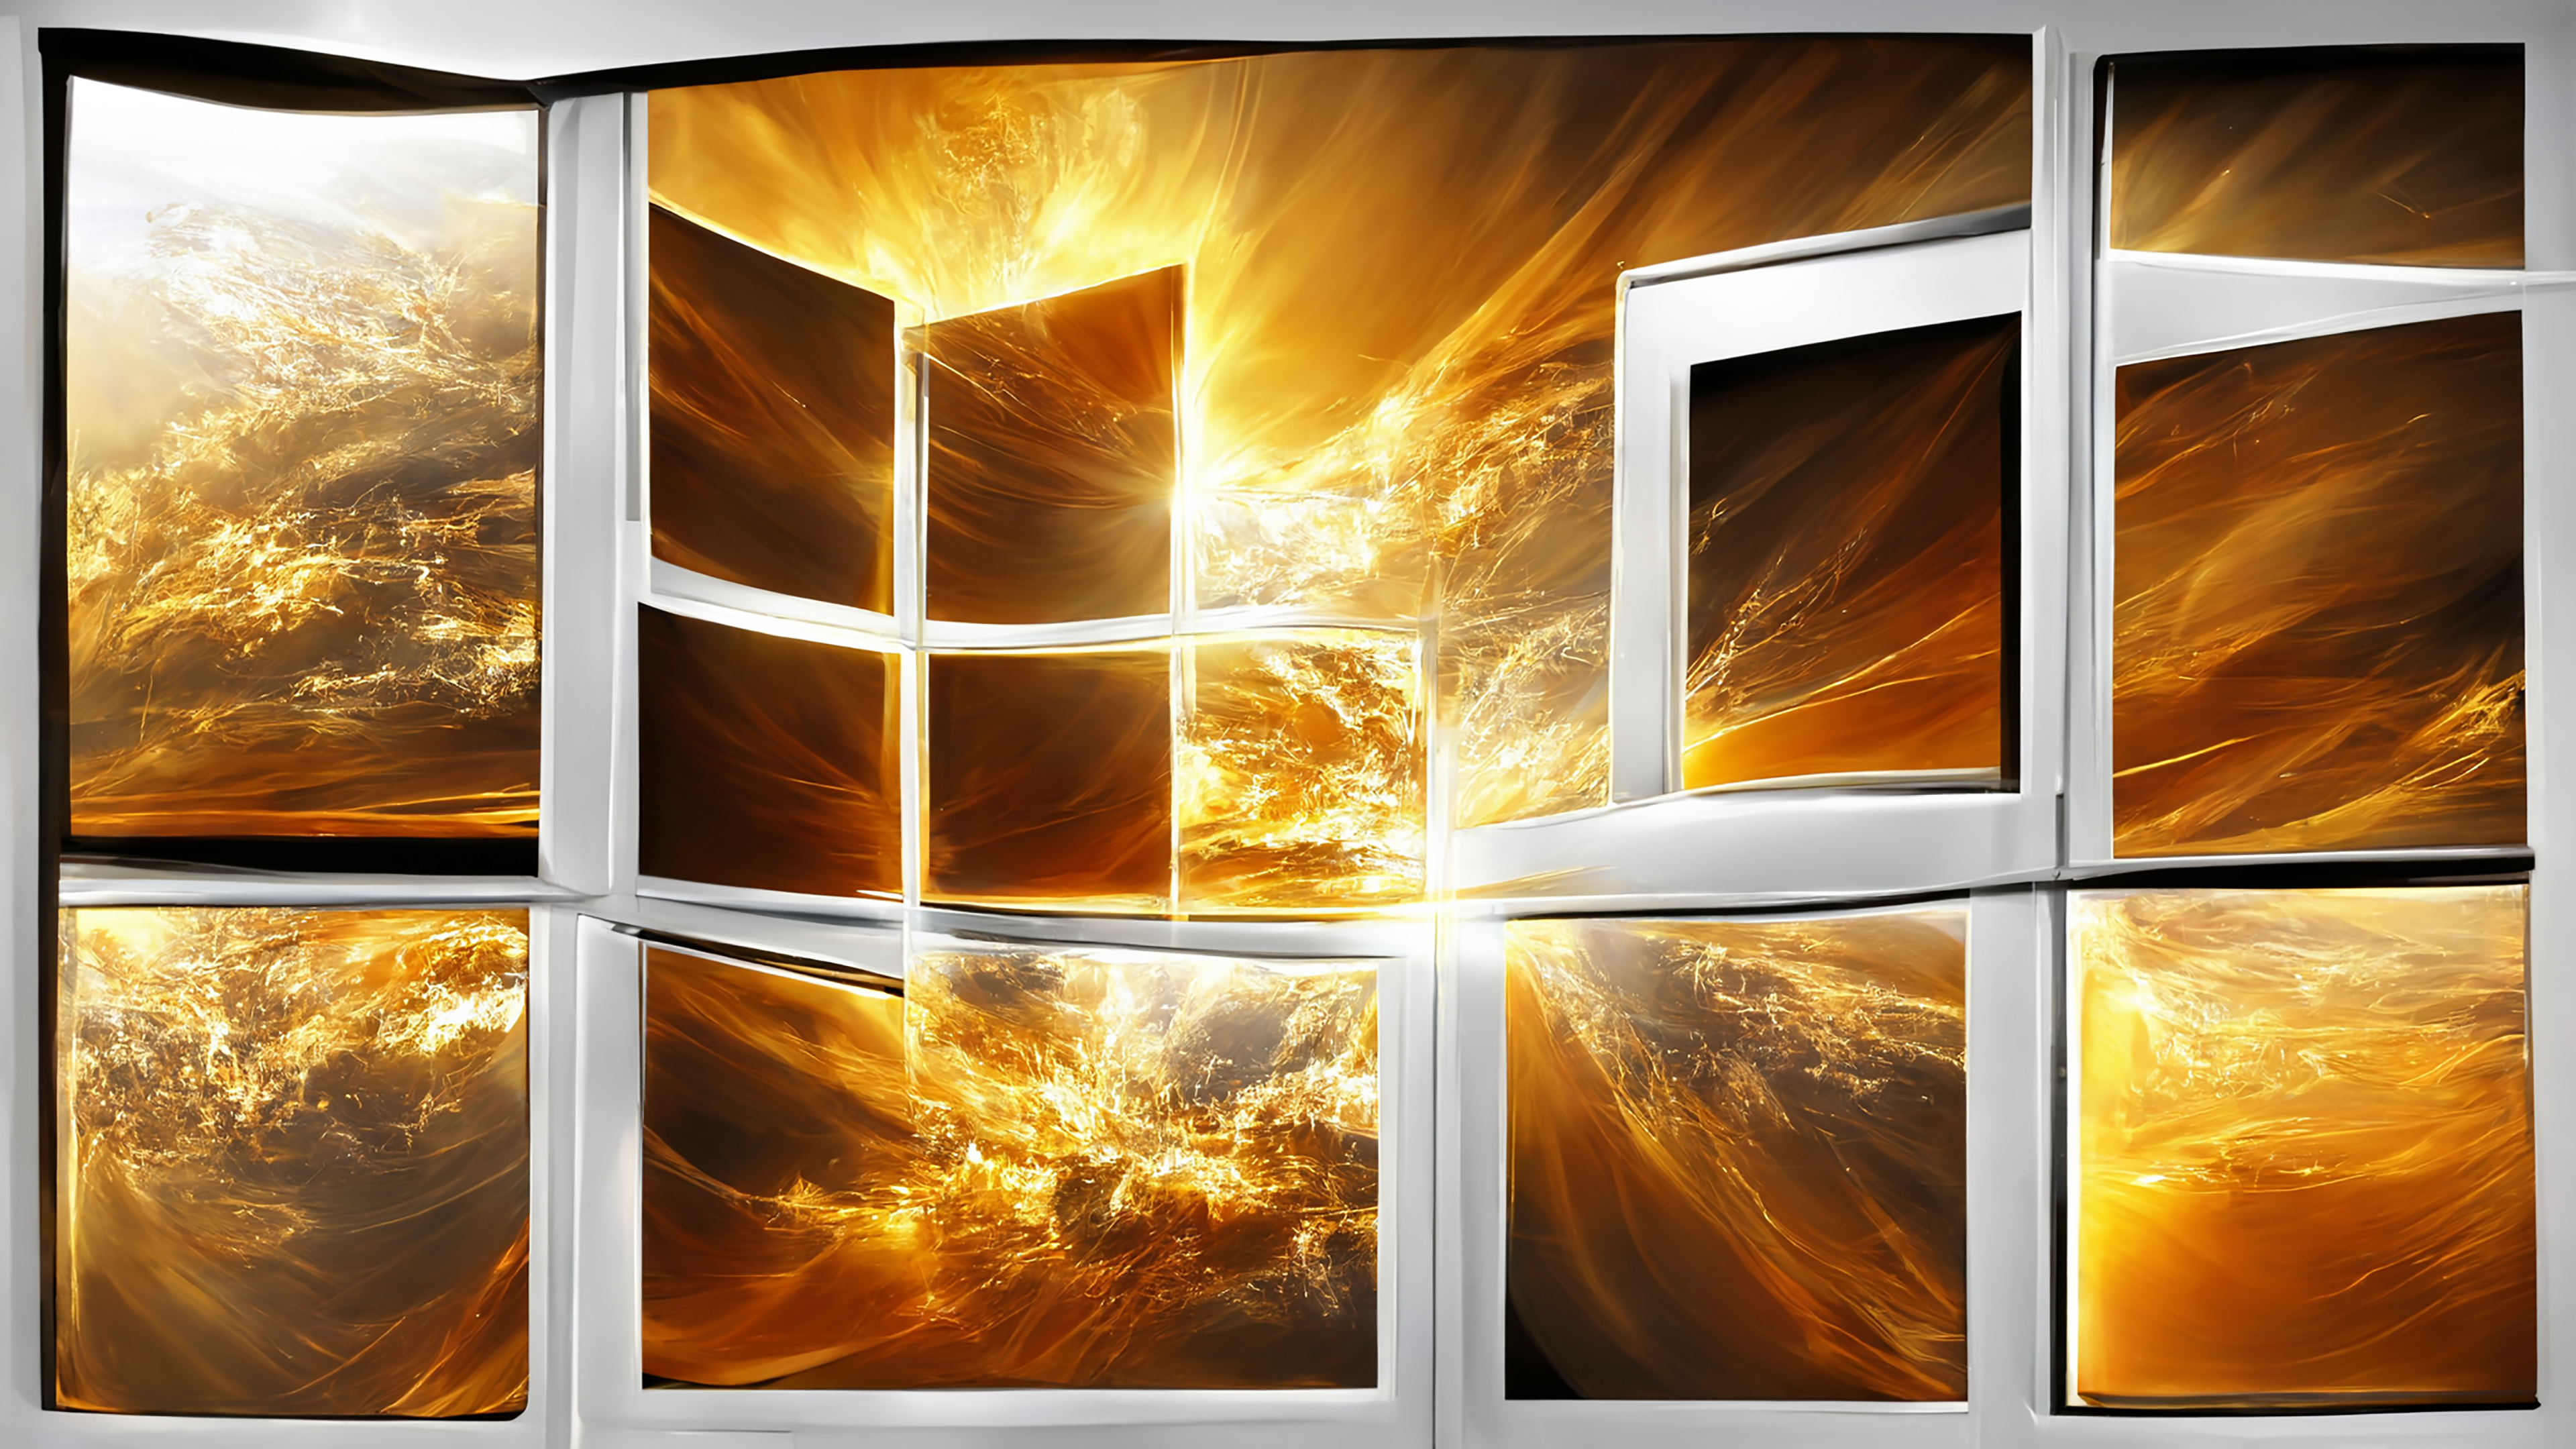 Windows 12 wallpapers created by AI download them now BetaNews